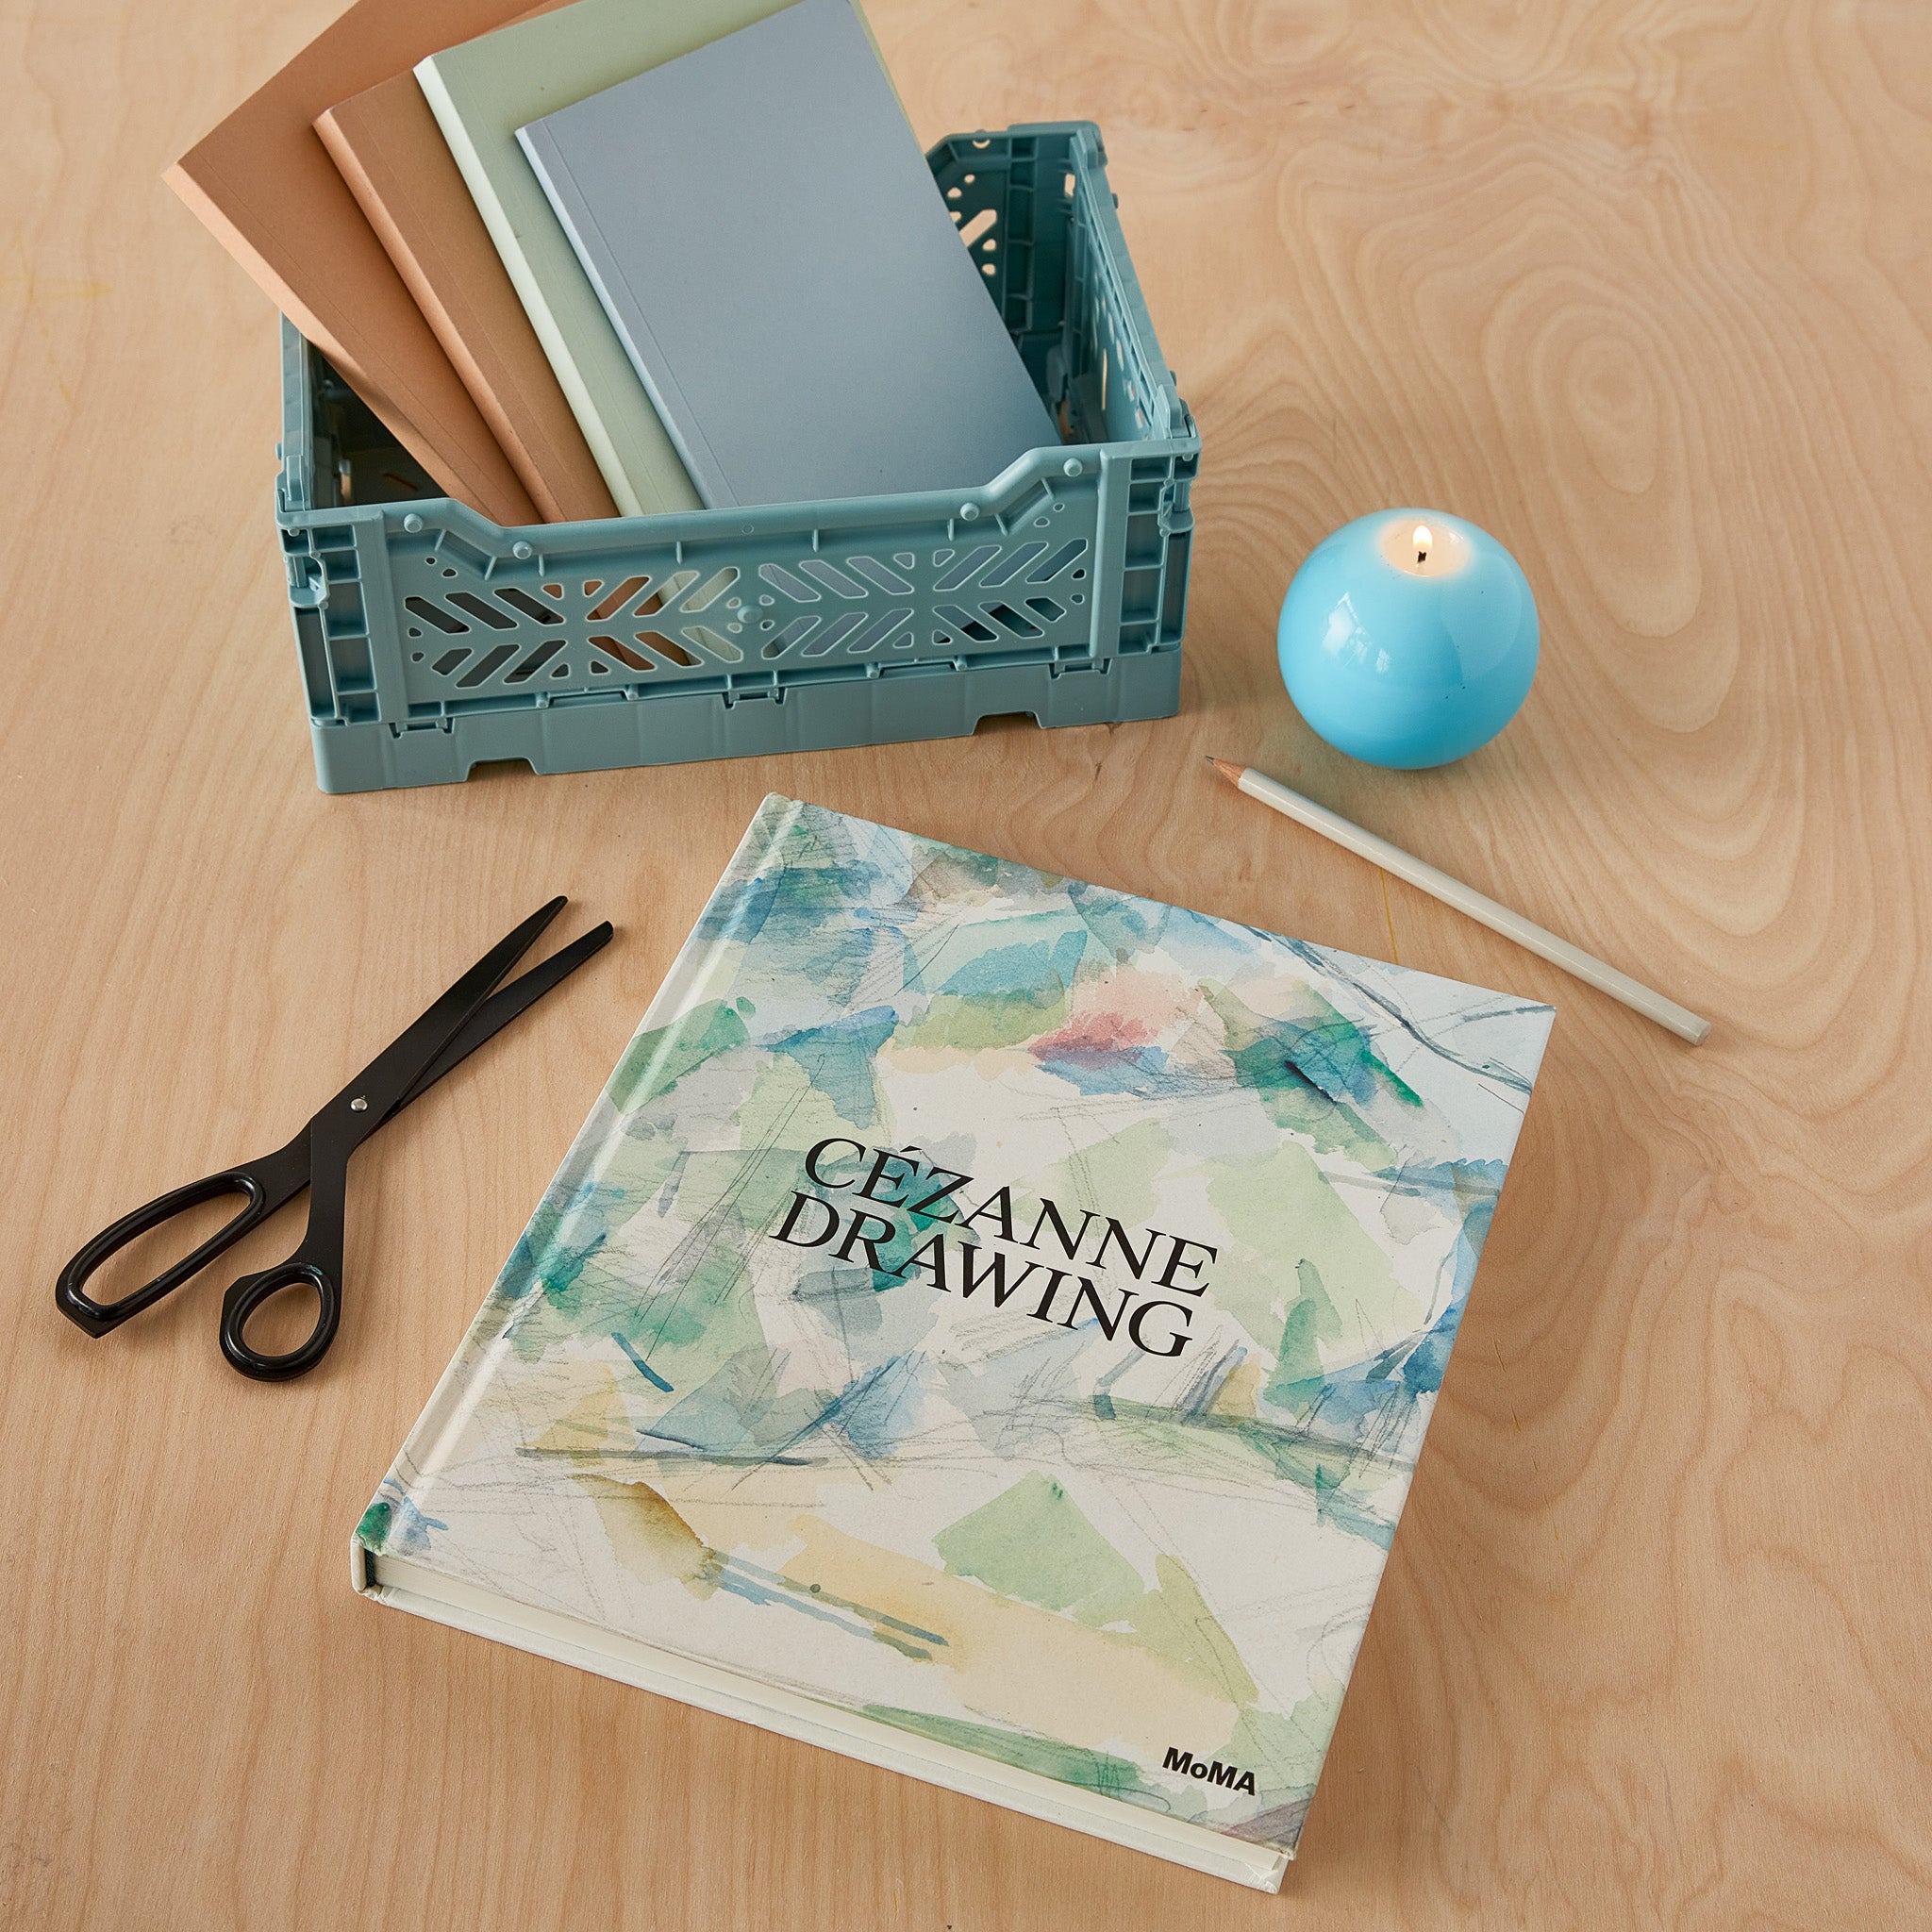 Cézanne Drawing - Hardcover